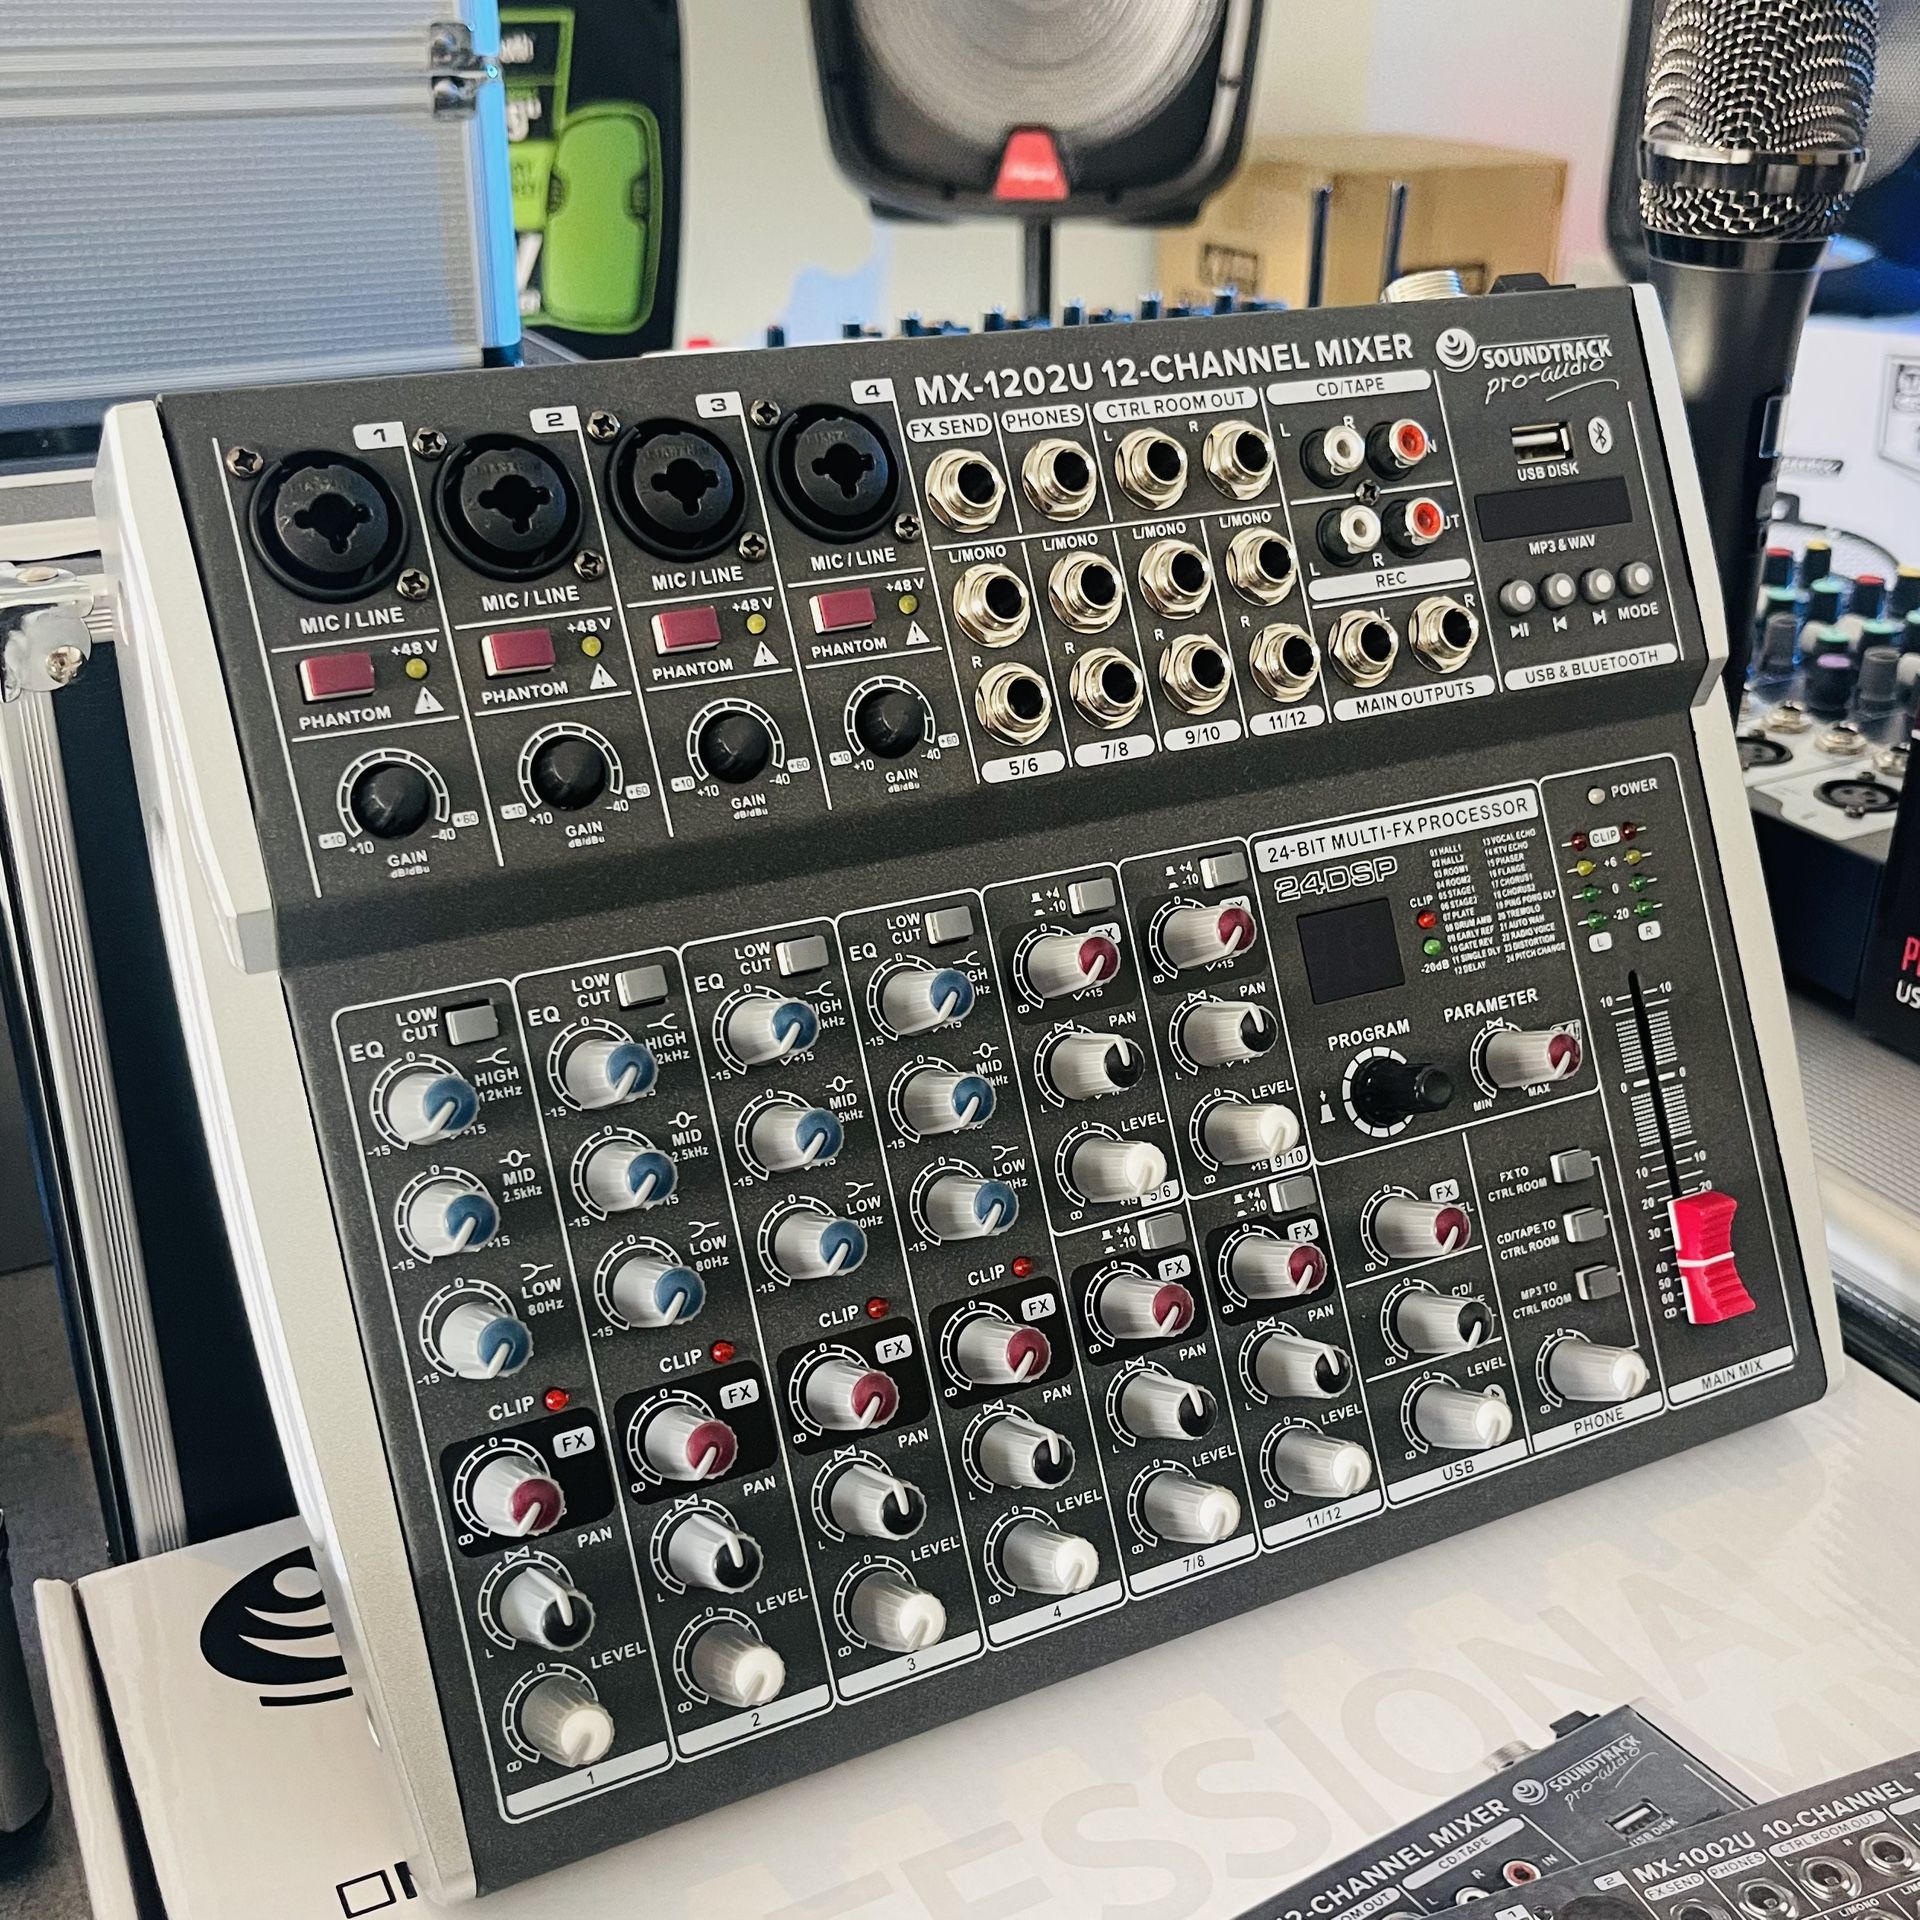 12 Channel Passive Mixer With Bluetooth, USB, MP3 Player. Sound Effects. It Would Work Perfect For  A Small Restaurant, Church, or For A Small Band 